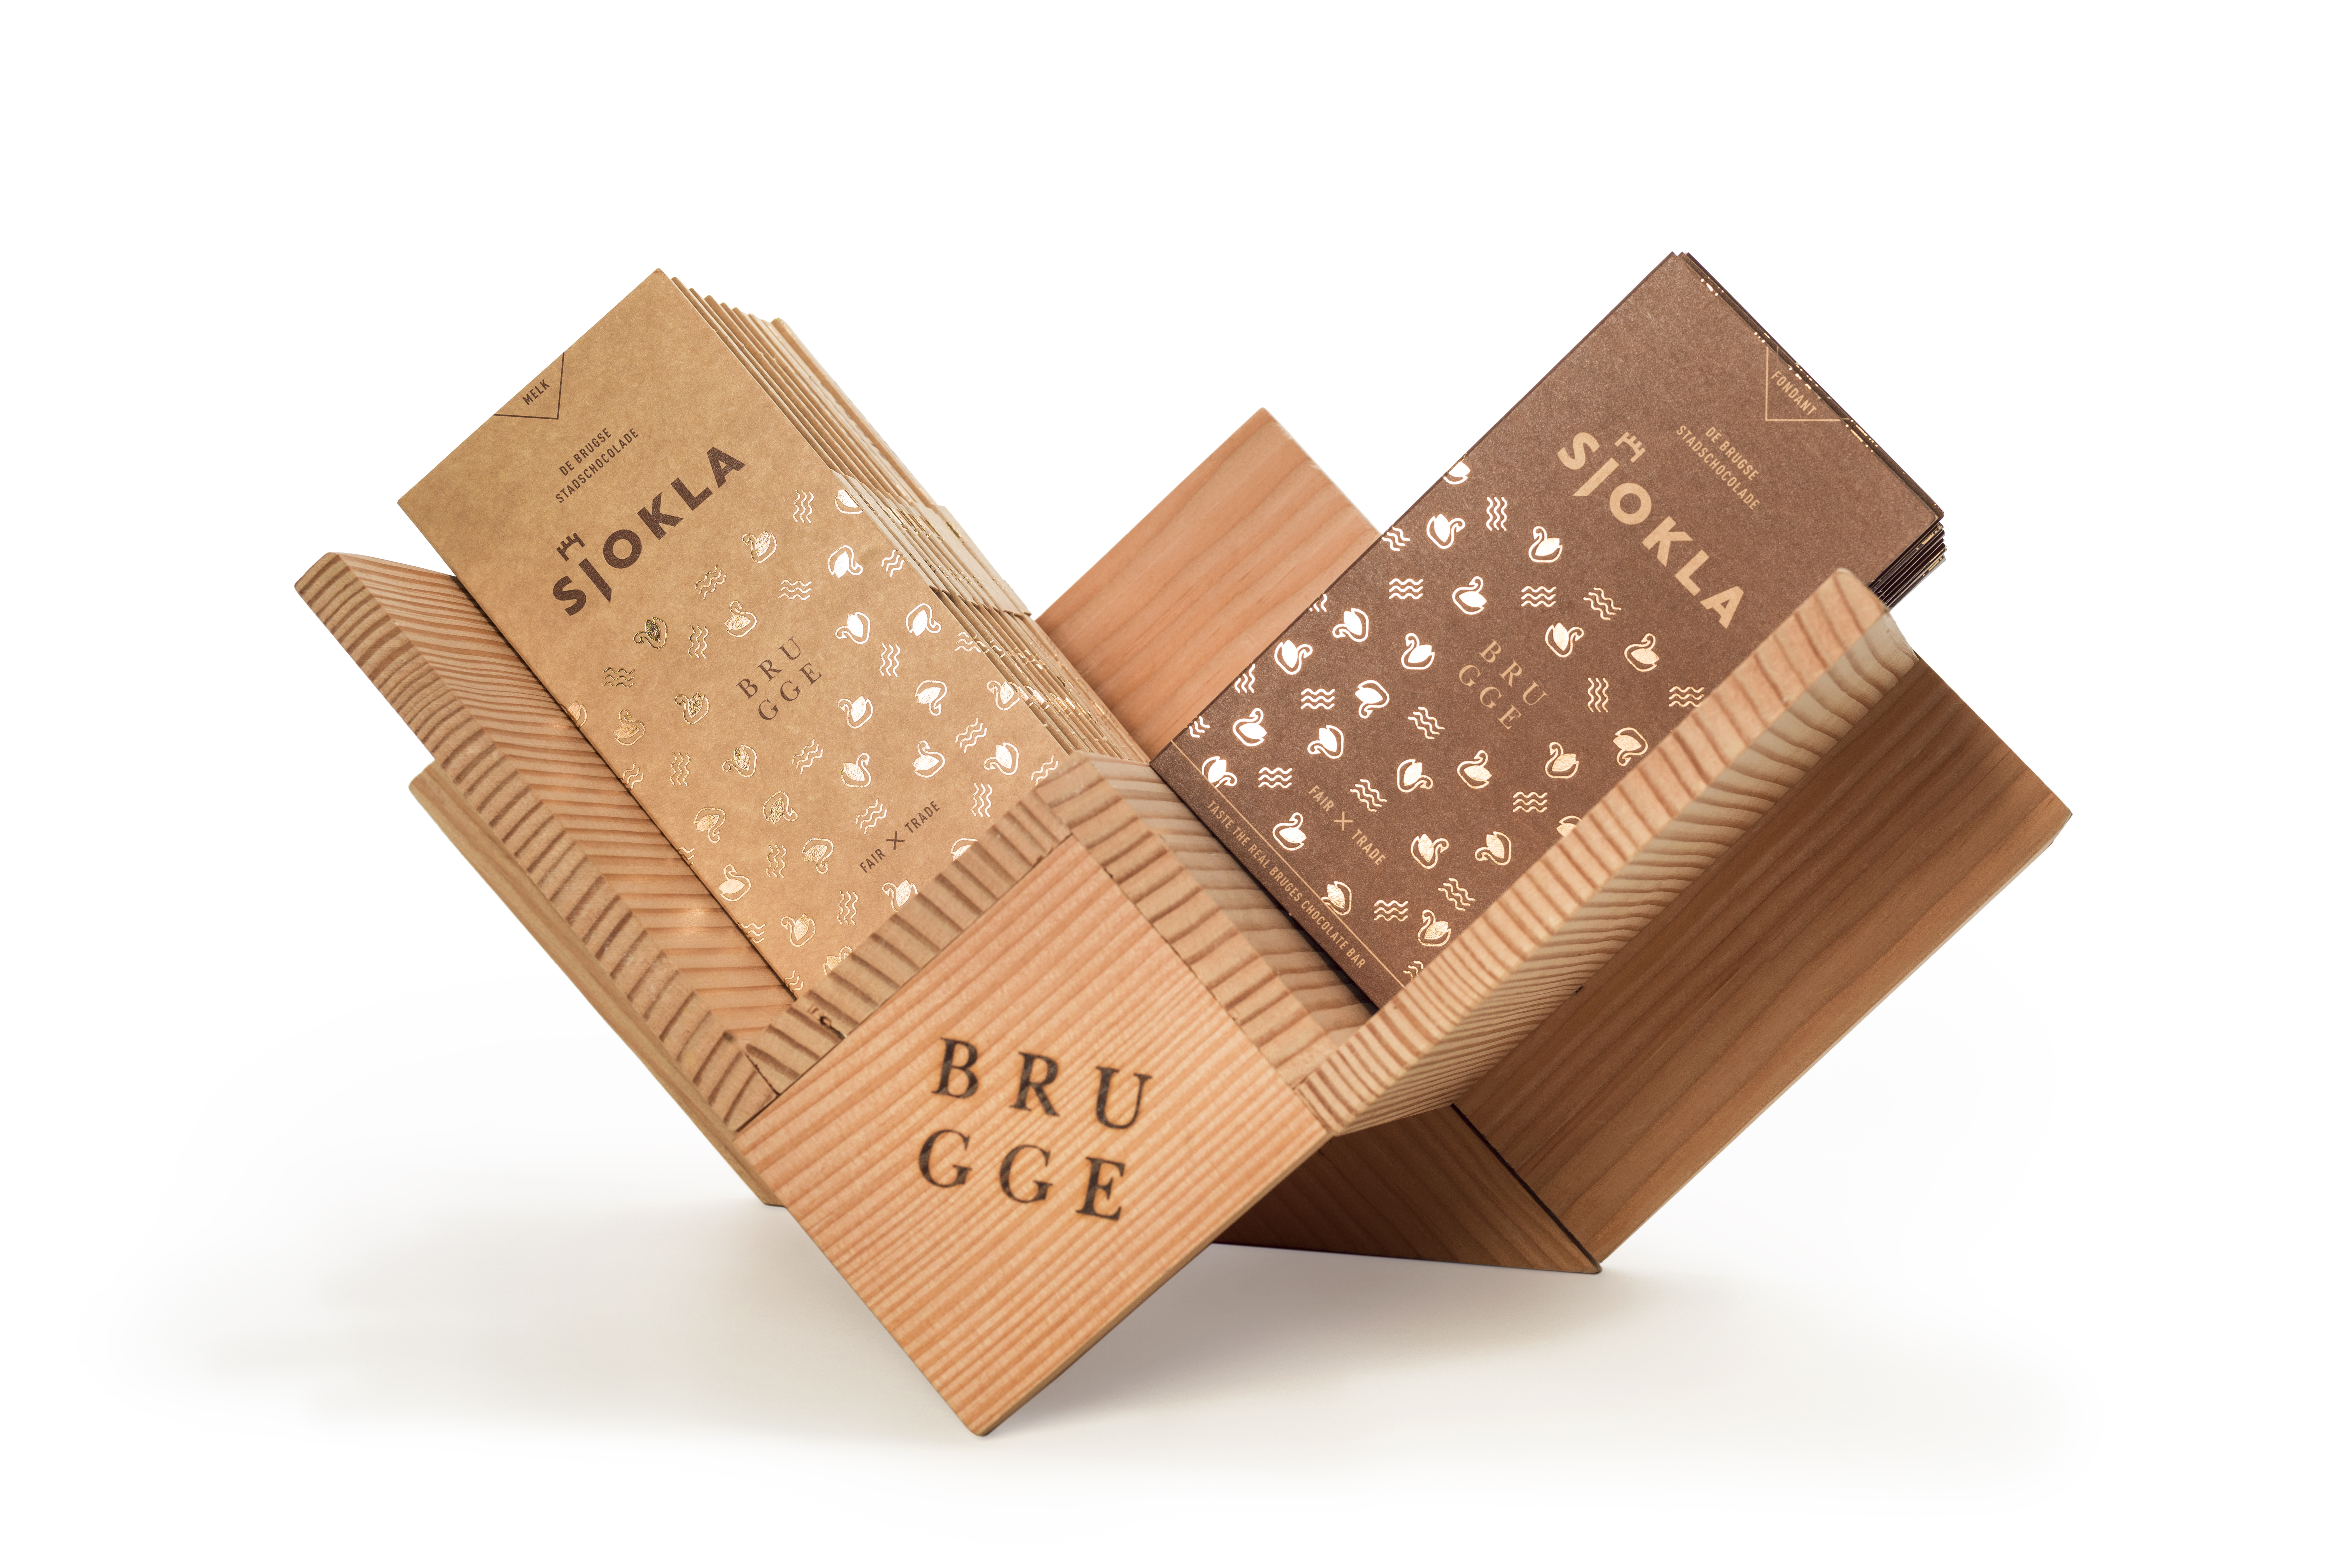 Bruges presents its first official city chocolate, made with Belcolade